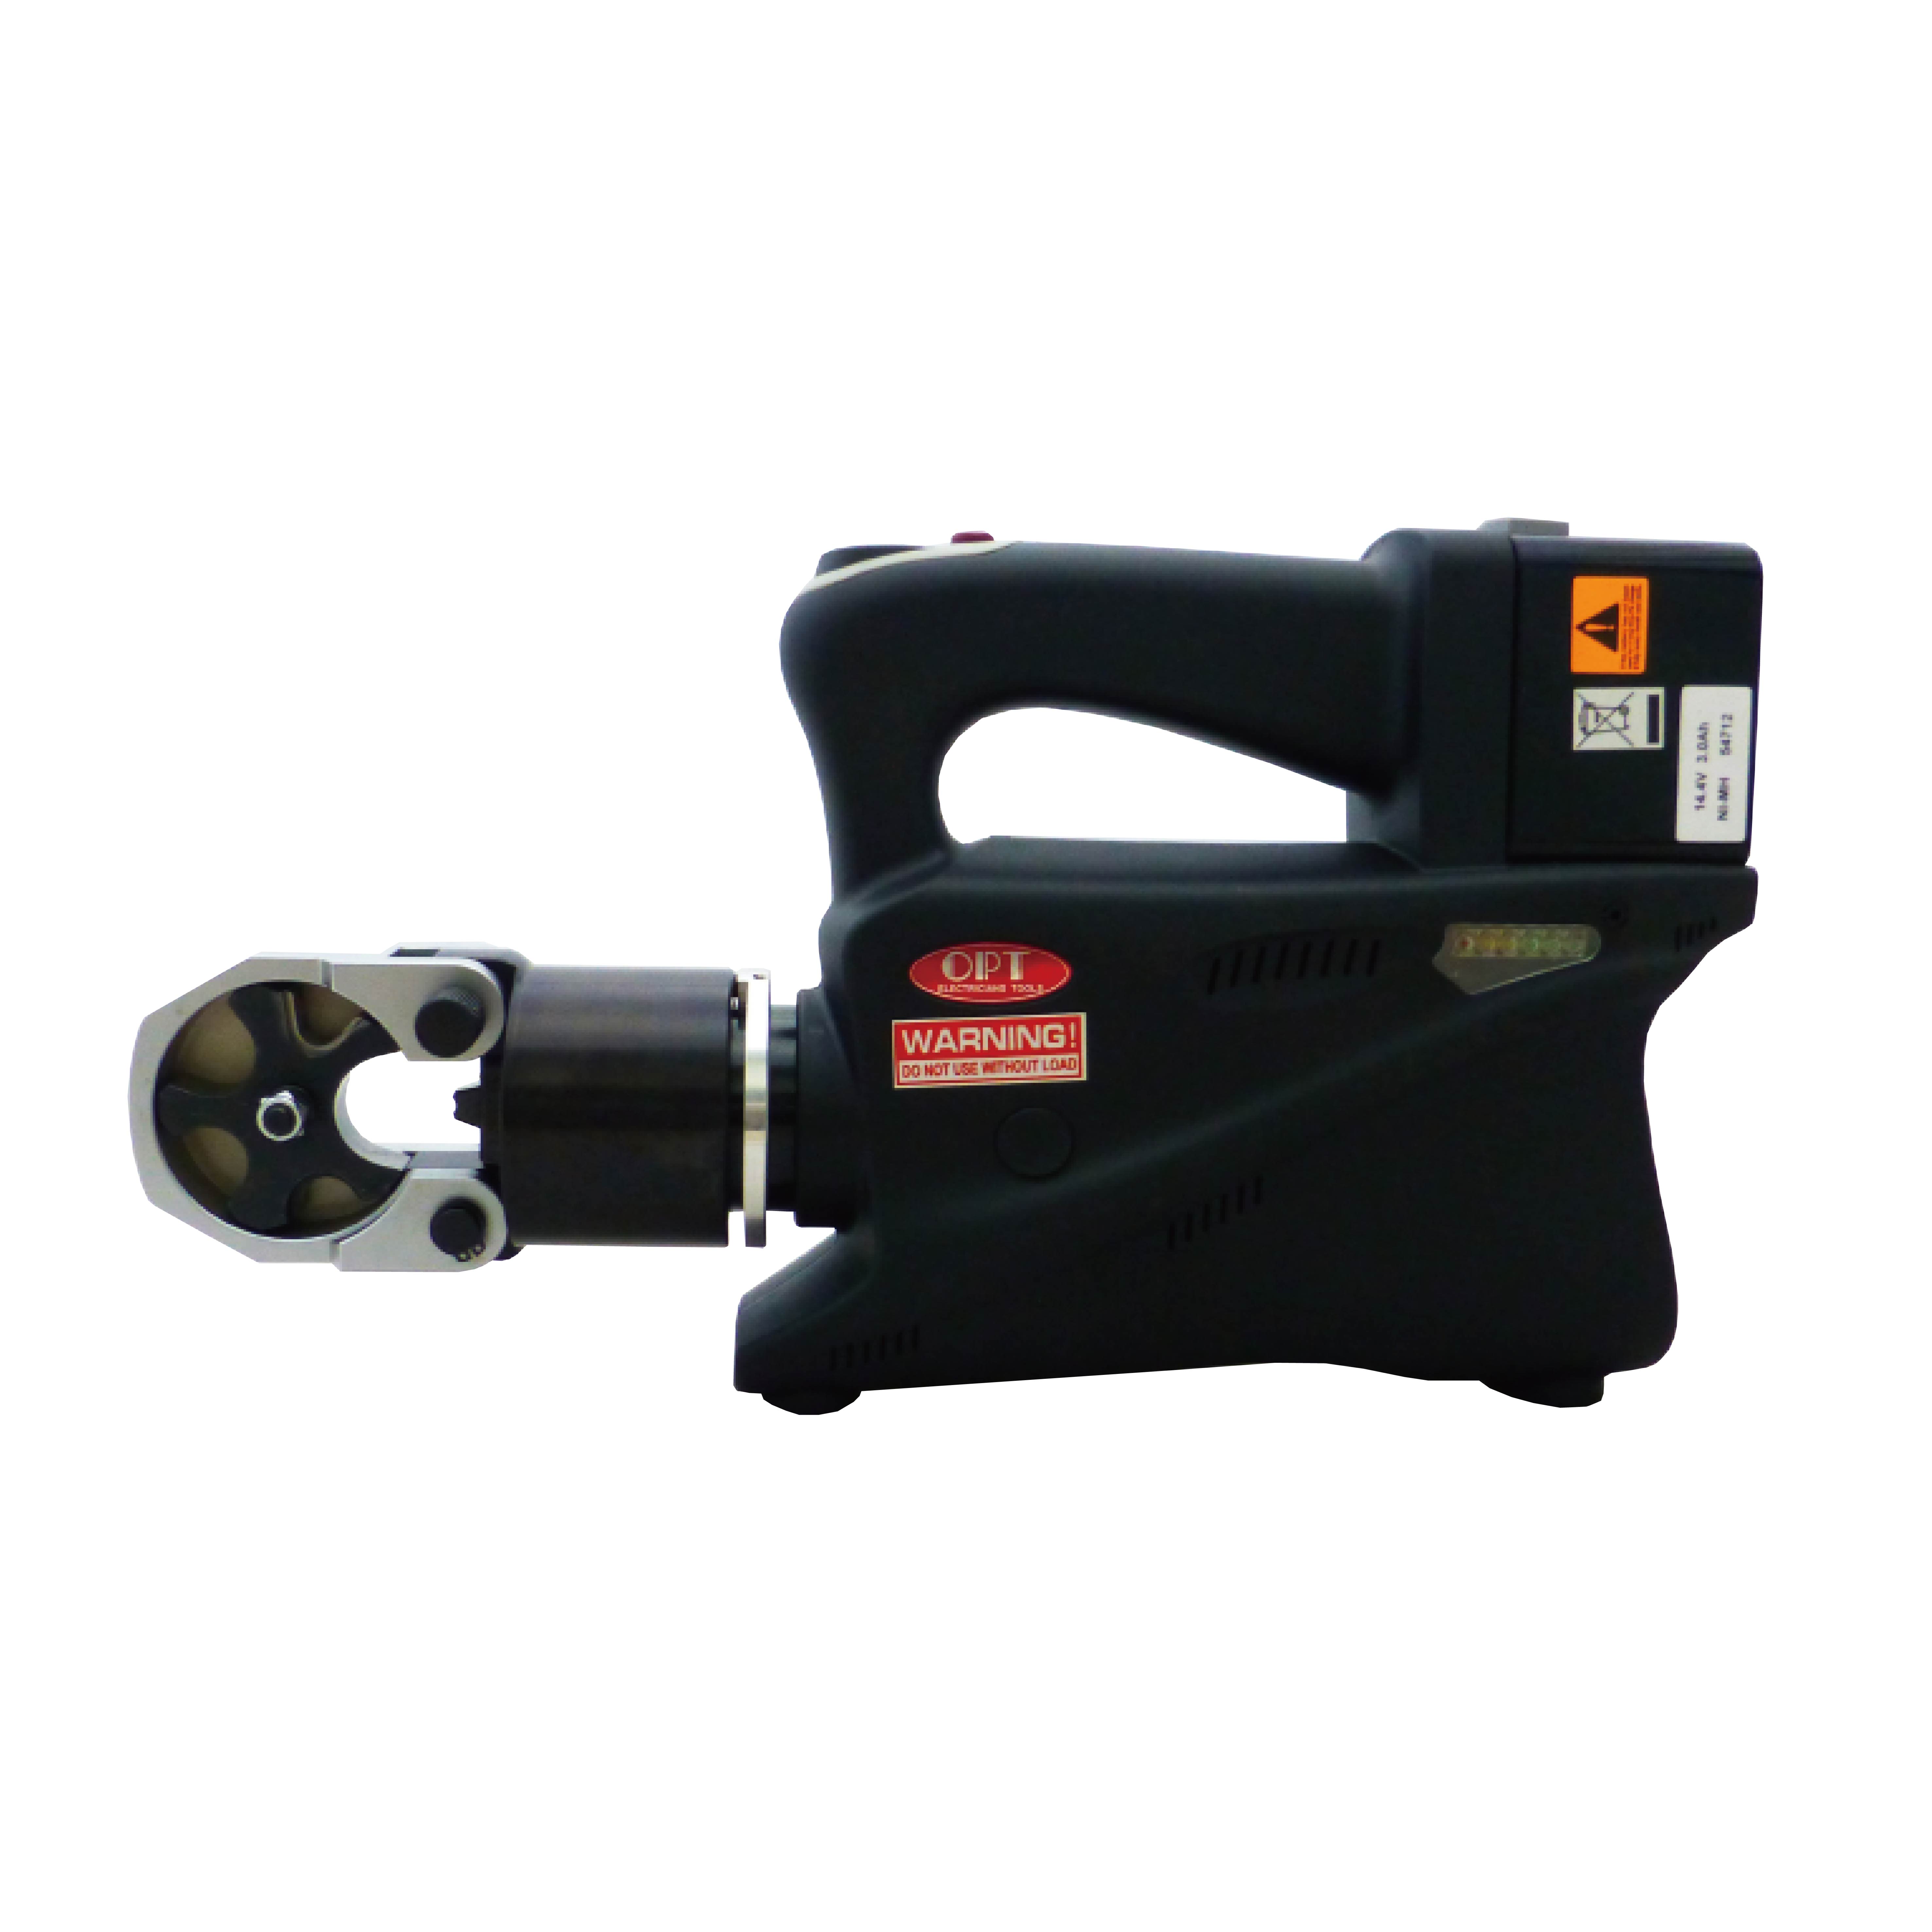 EPL-150D CORDLESS HYDRAULIC CRIMPING TOOLS